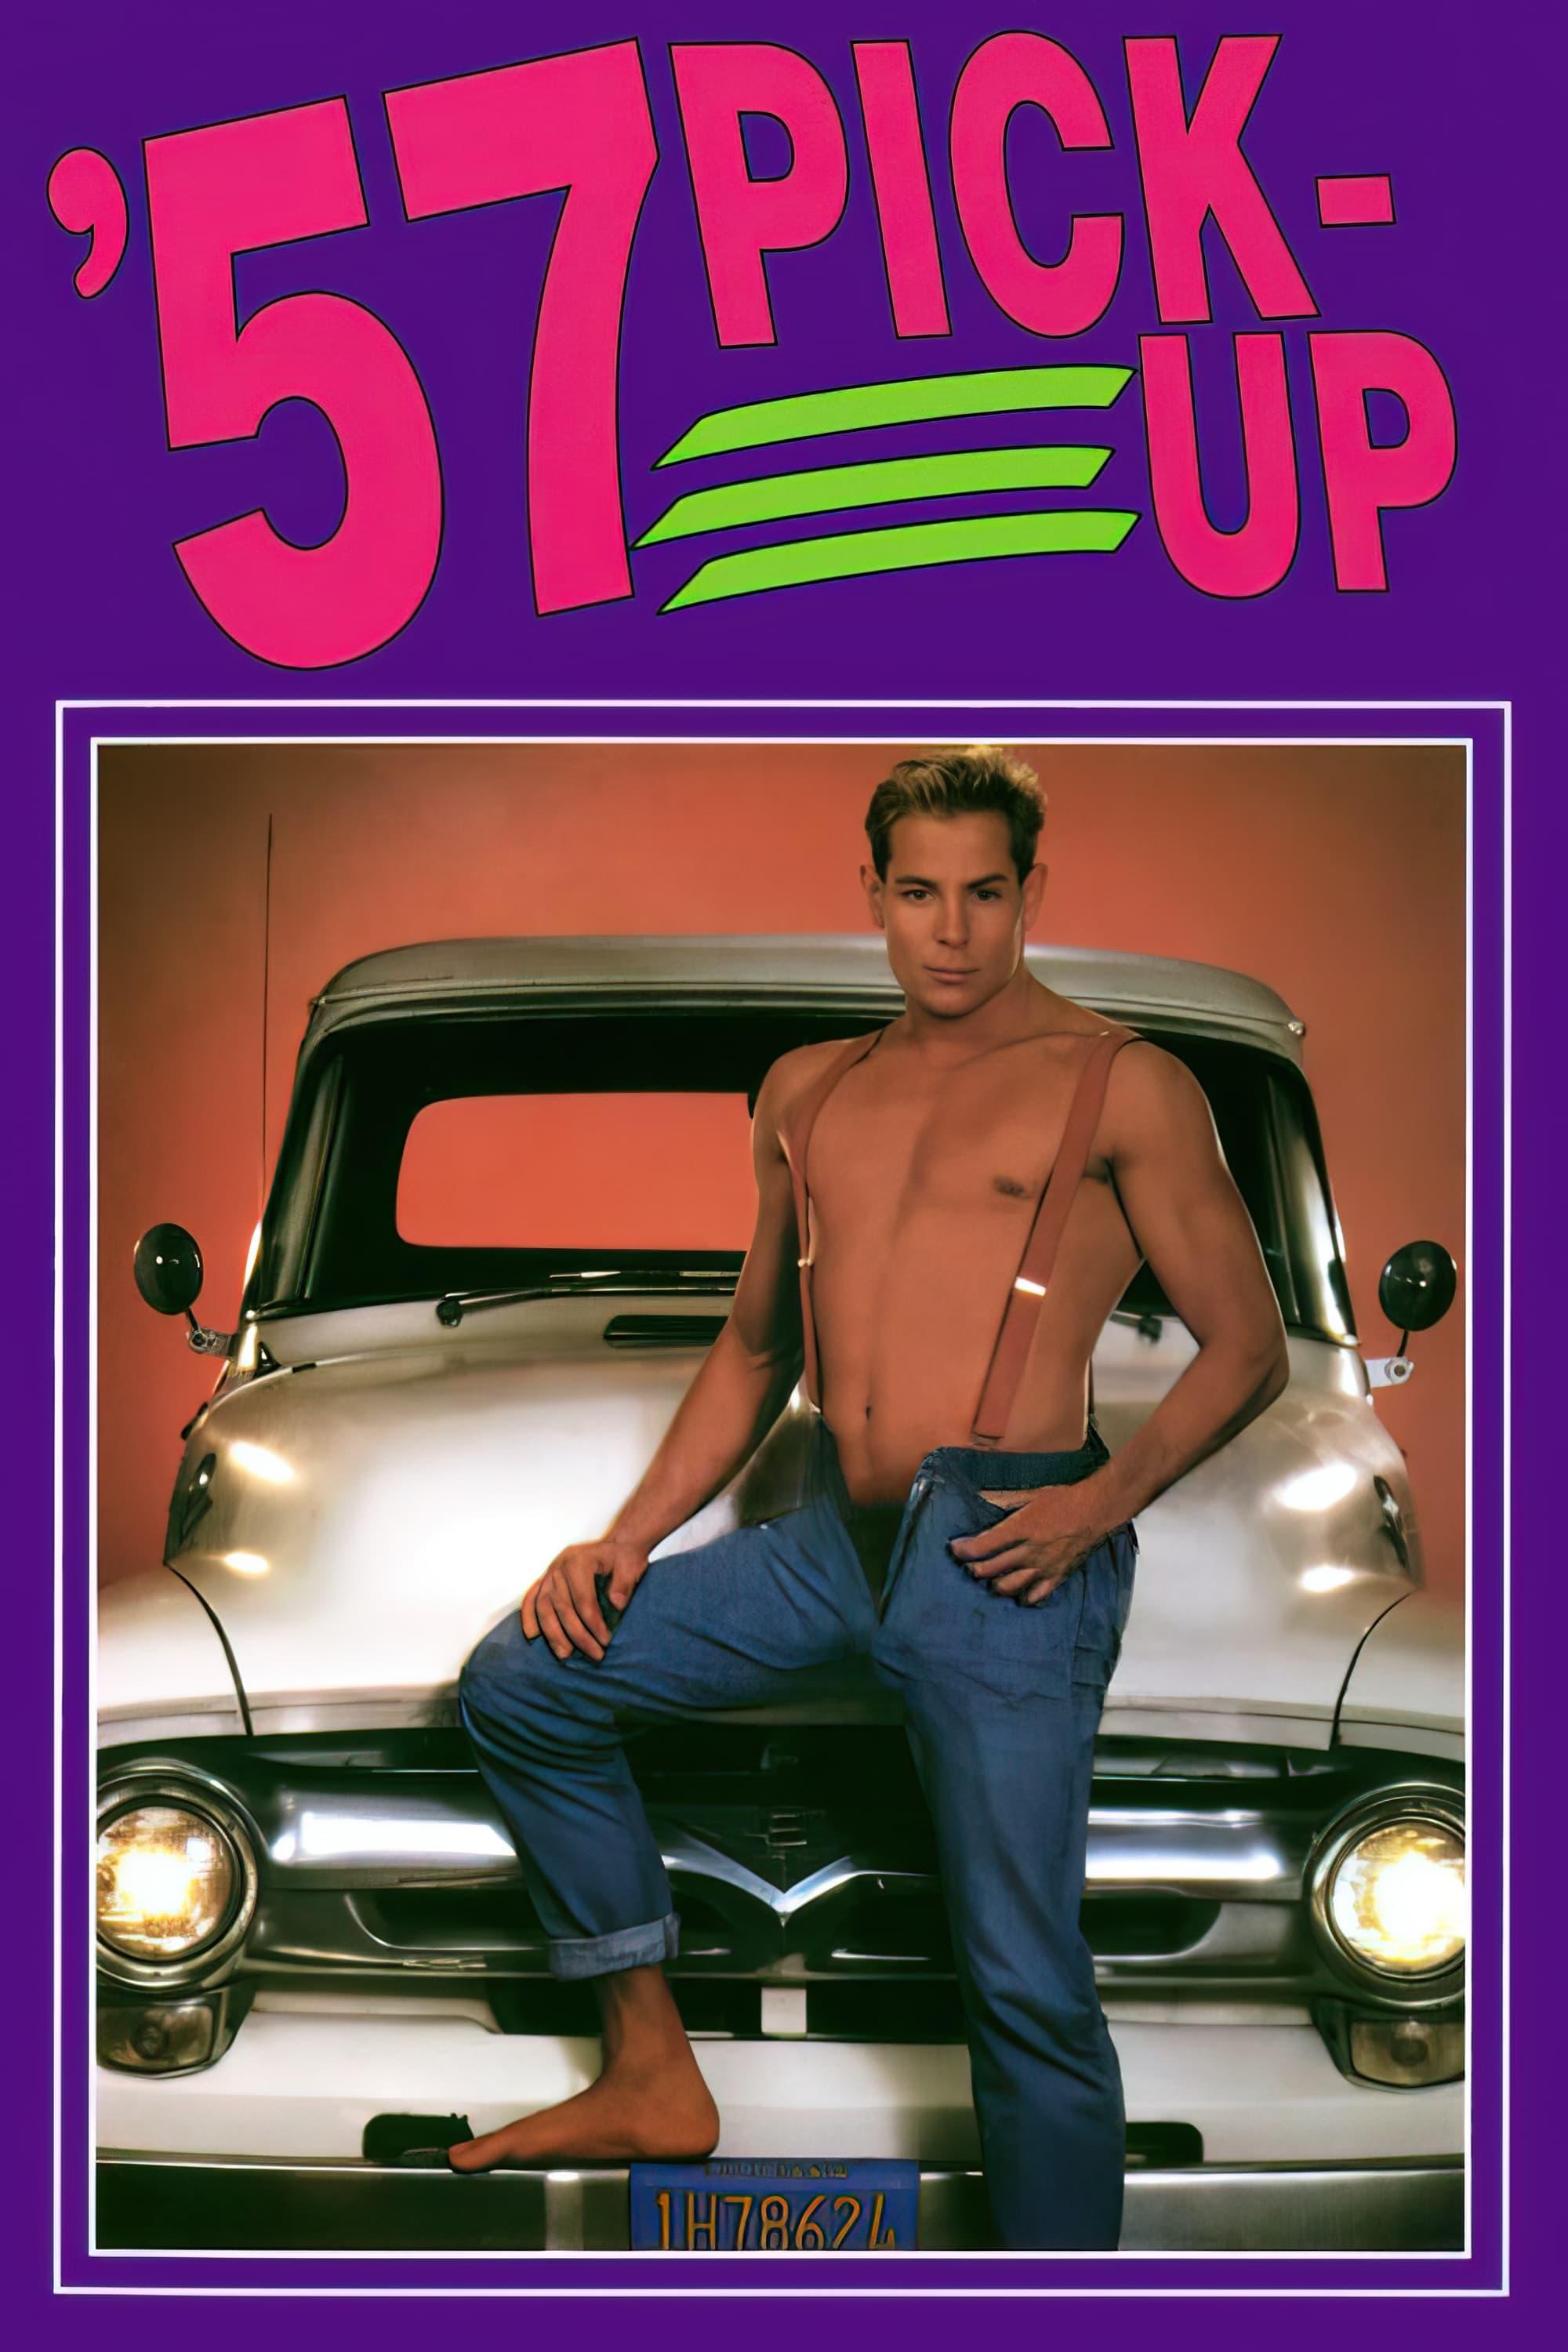 '57 Pick-Up poster